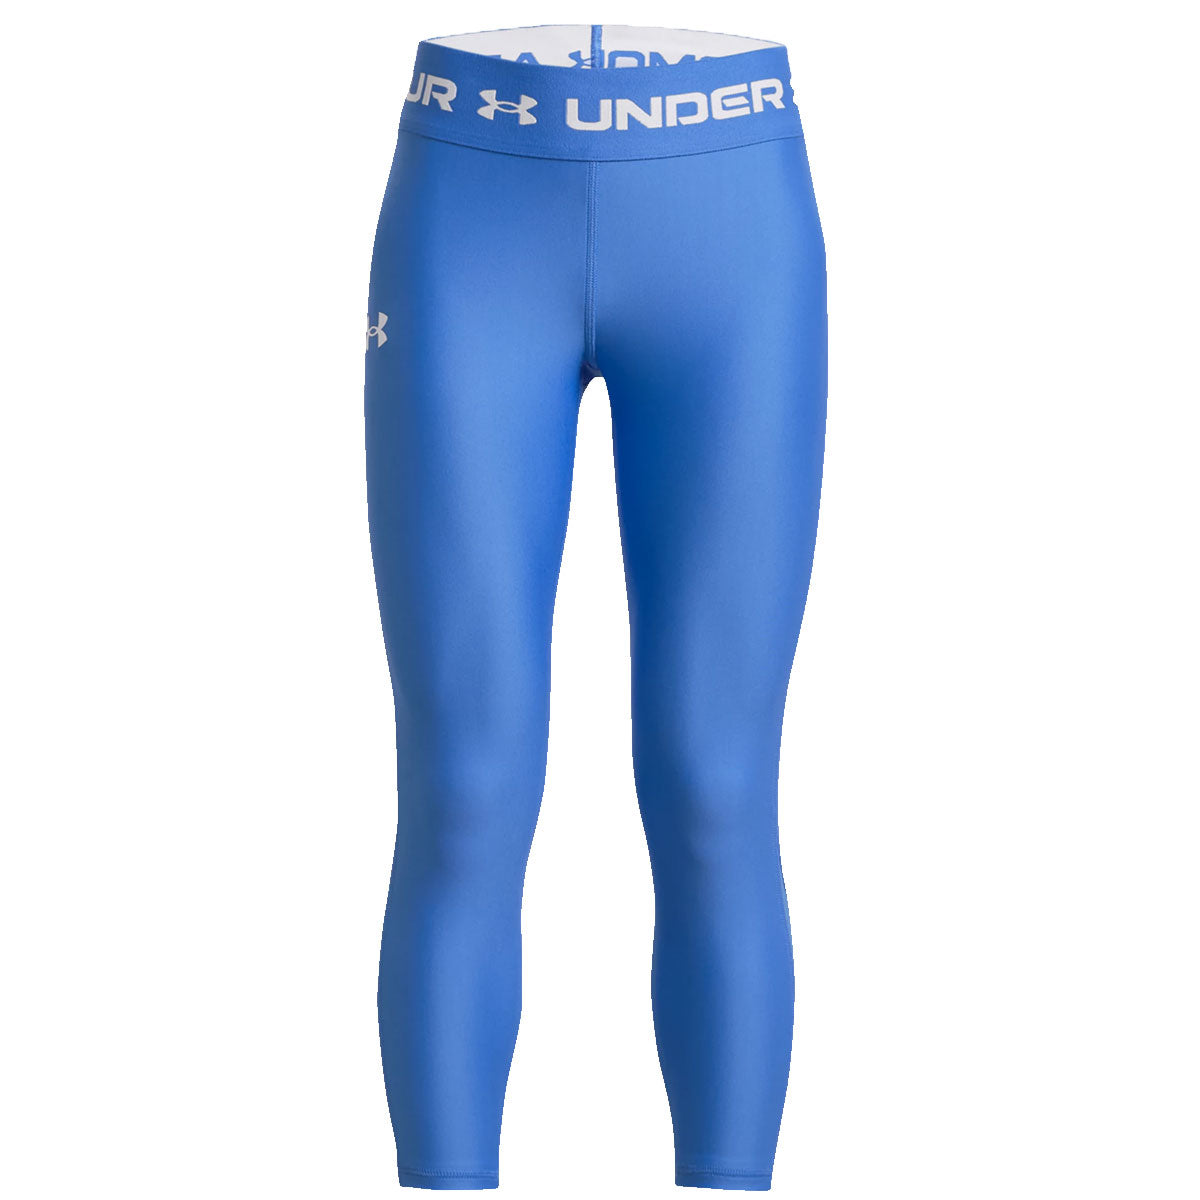 Under Armour Heatgear Armour Ankle Crop Tights - Girls - Water